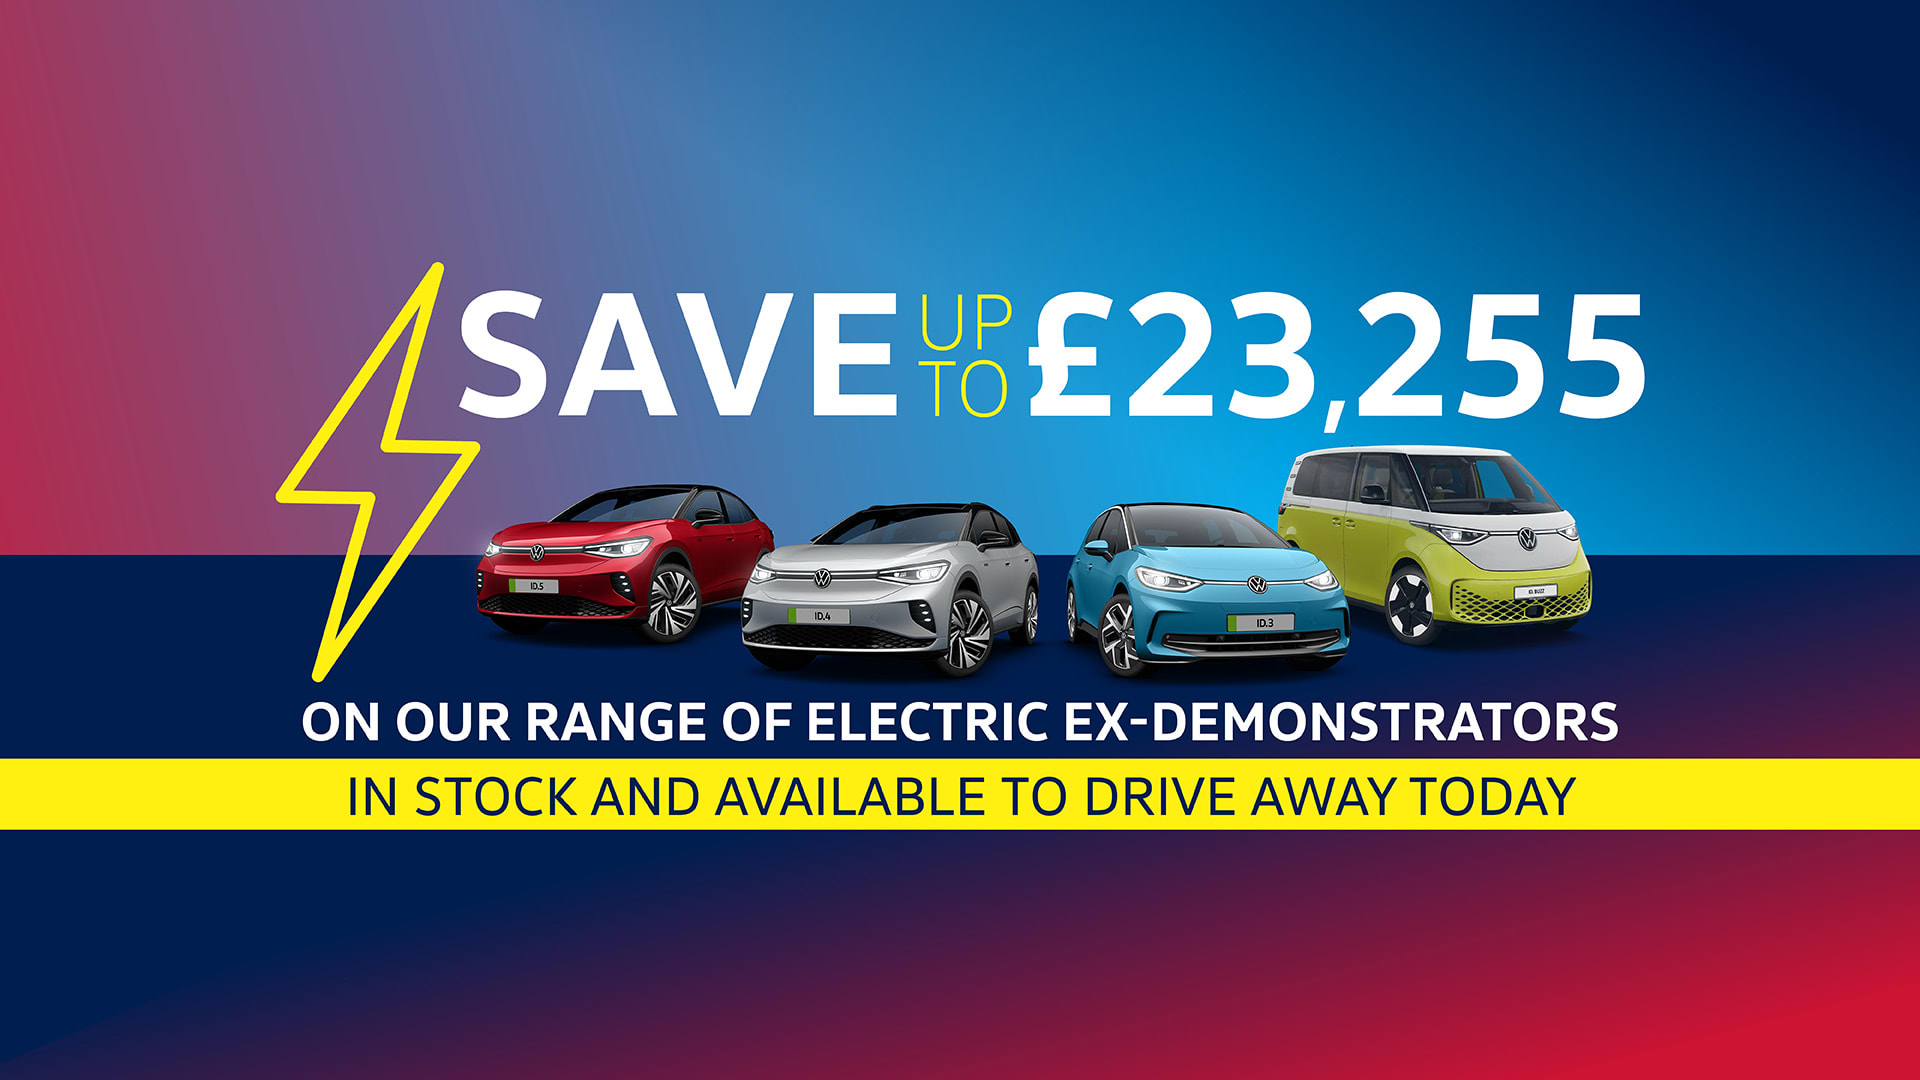 Save up to £23,255 on an ex-demo Volkswagen ID.